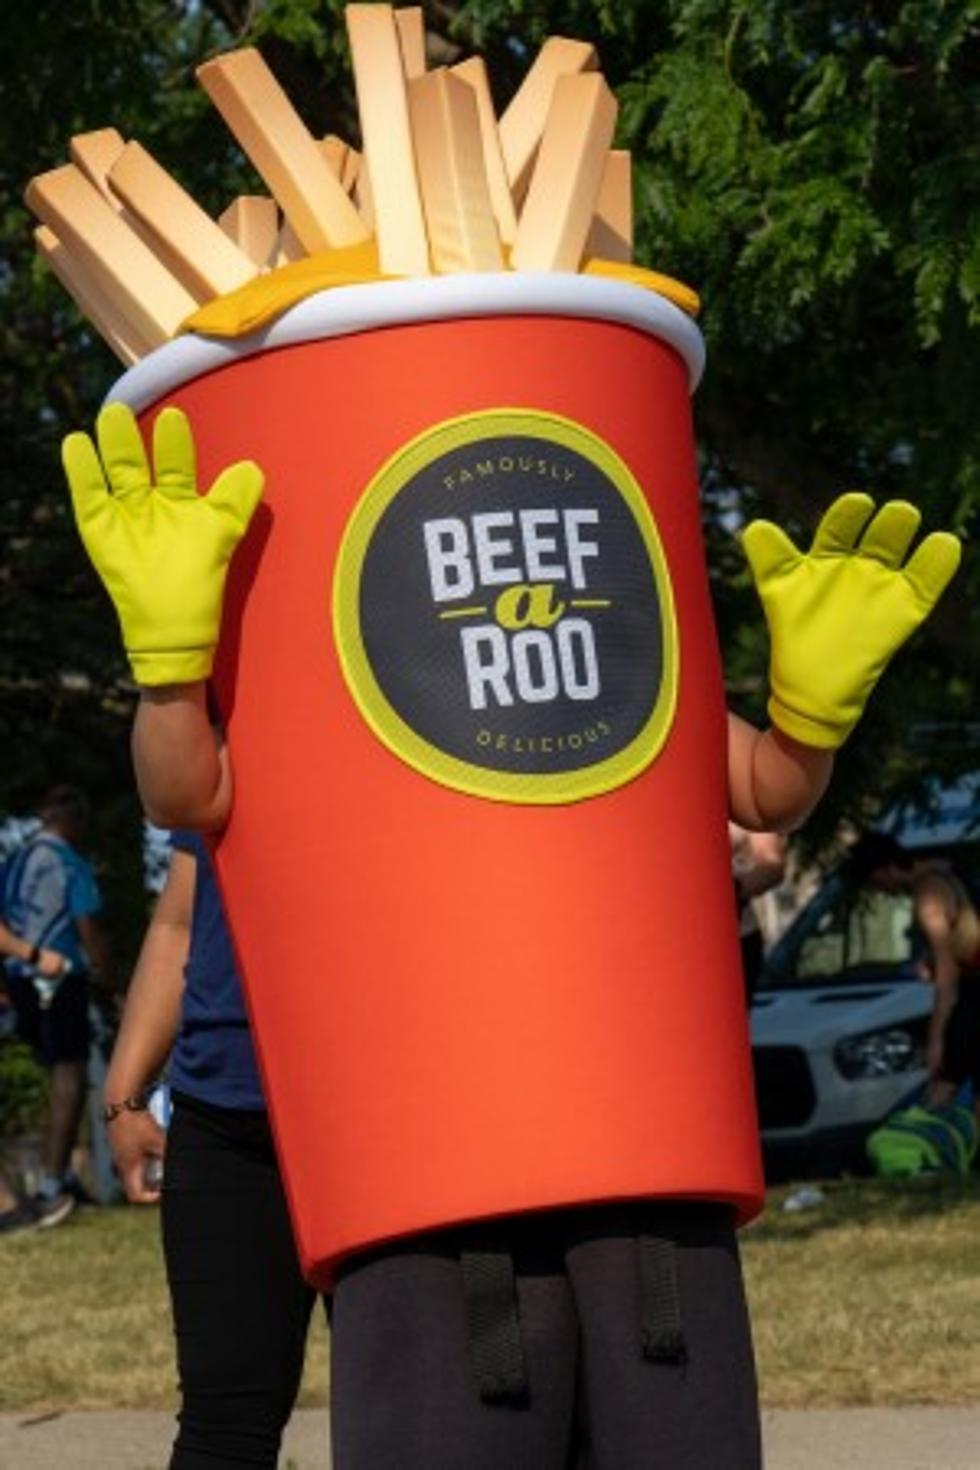 Serious Illinois Food Question: What Happened To Beef-A-Roo&#8217;s Fries?